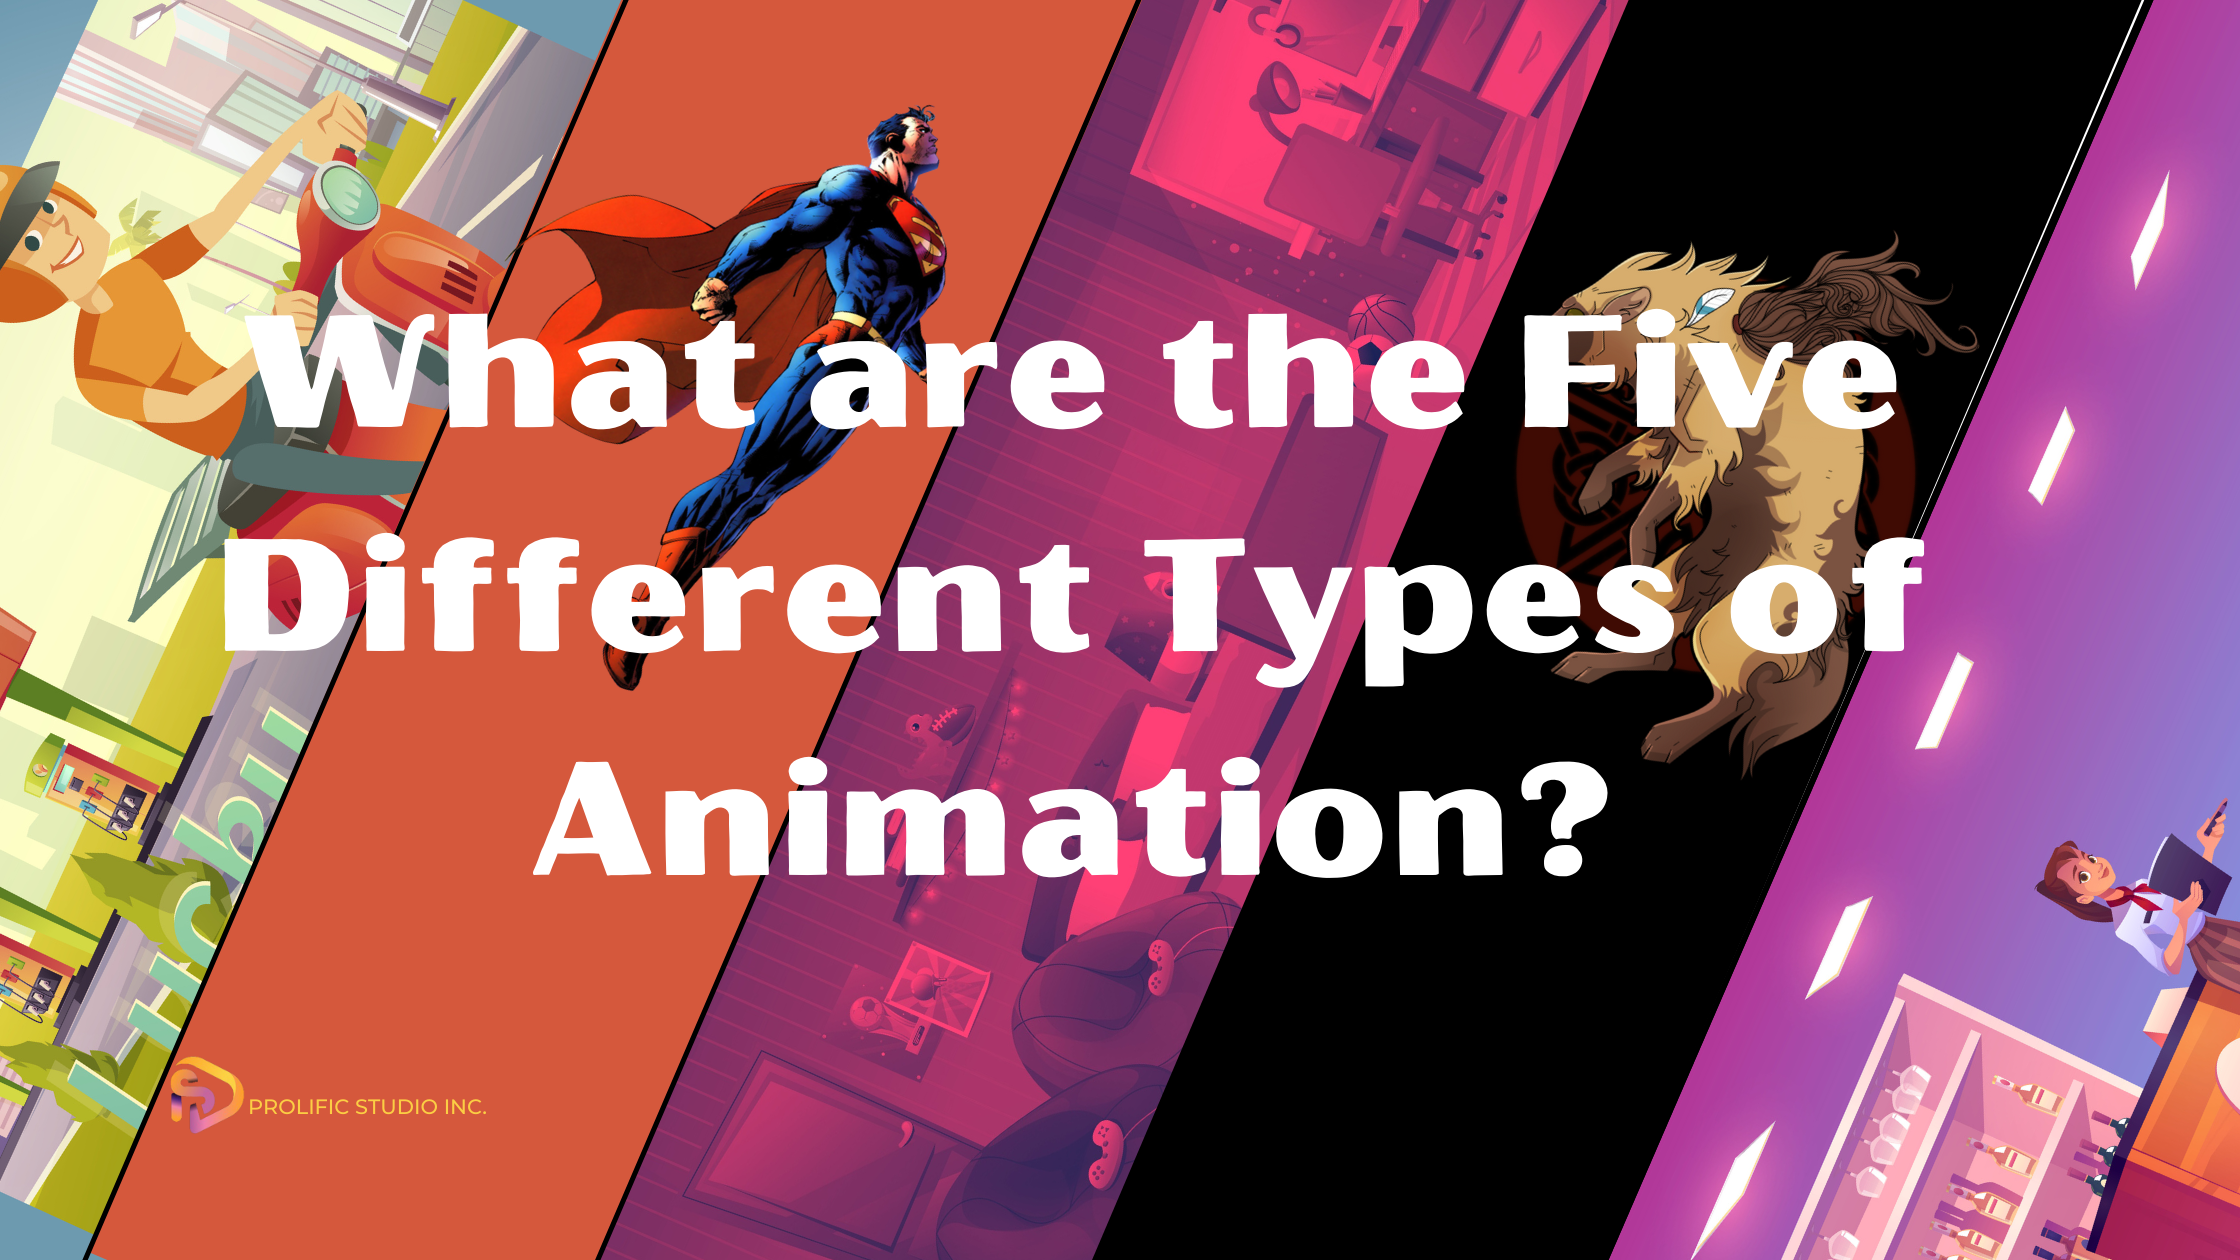 What are the Five Different Types of Animation?